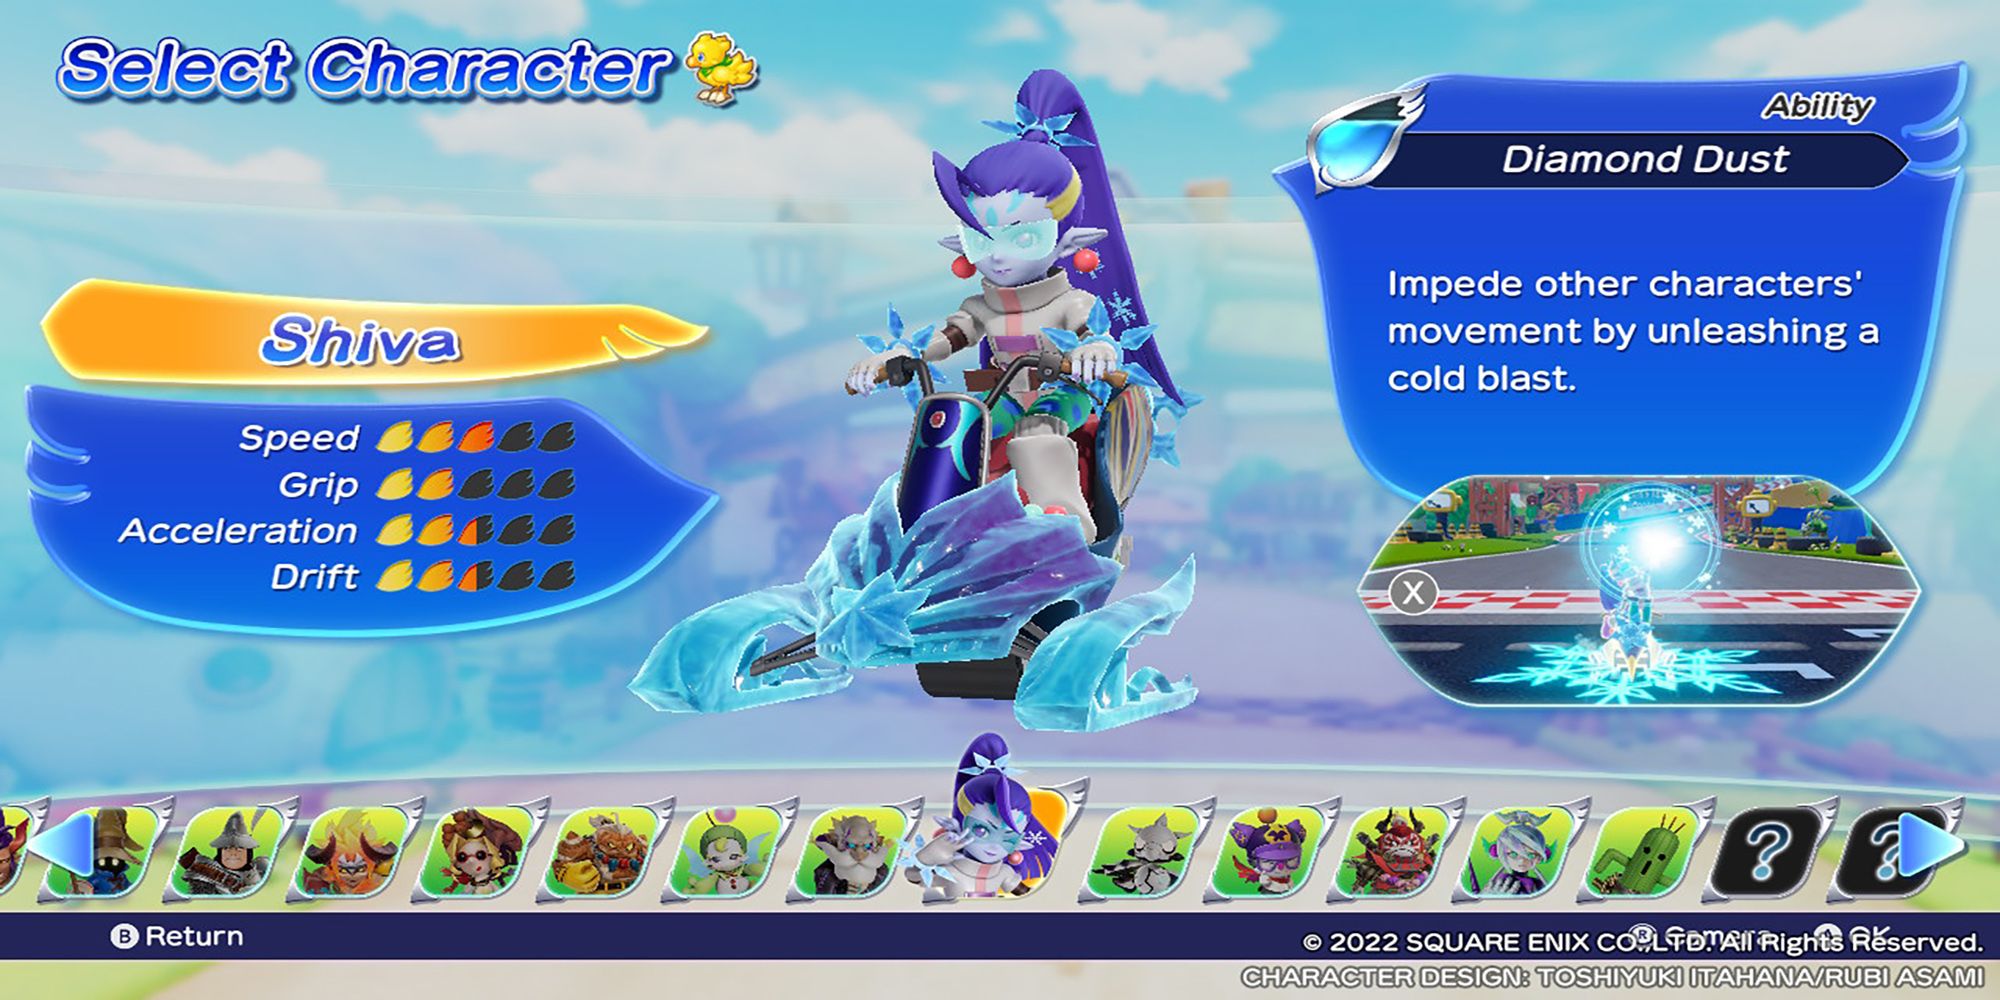 Shiva's character model, along with her stats and abilities, in the Select Character menu. Chocobo GP.